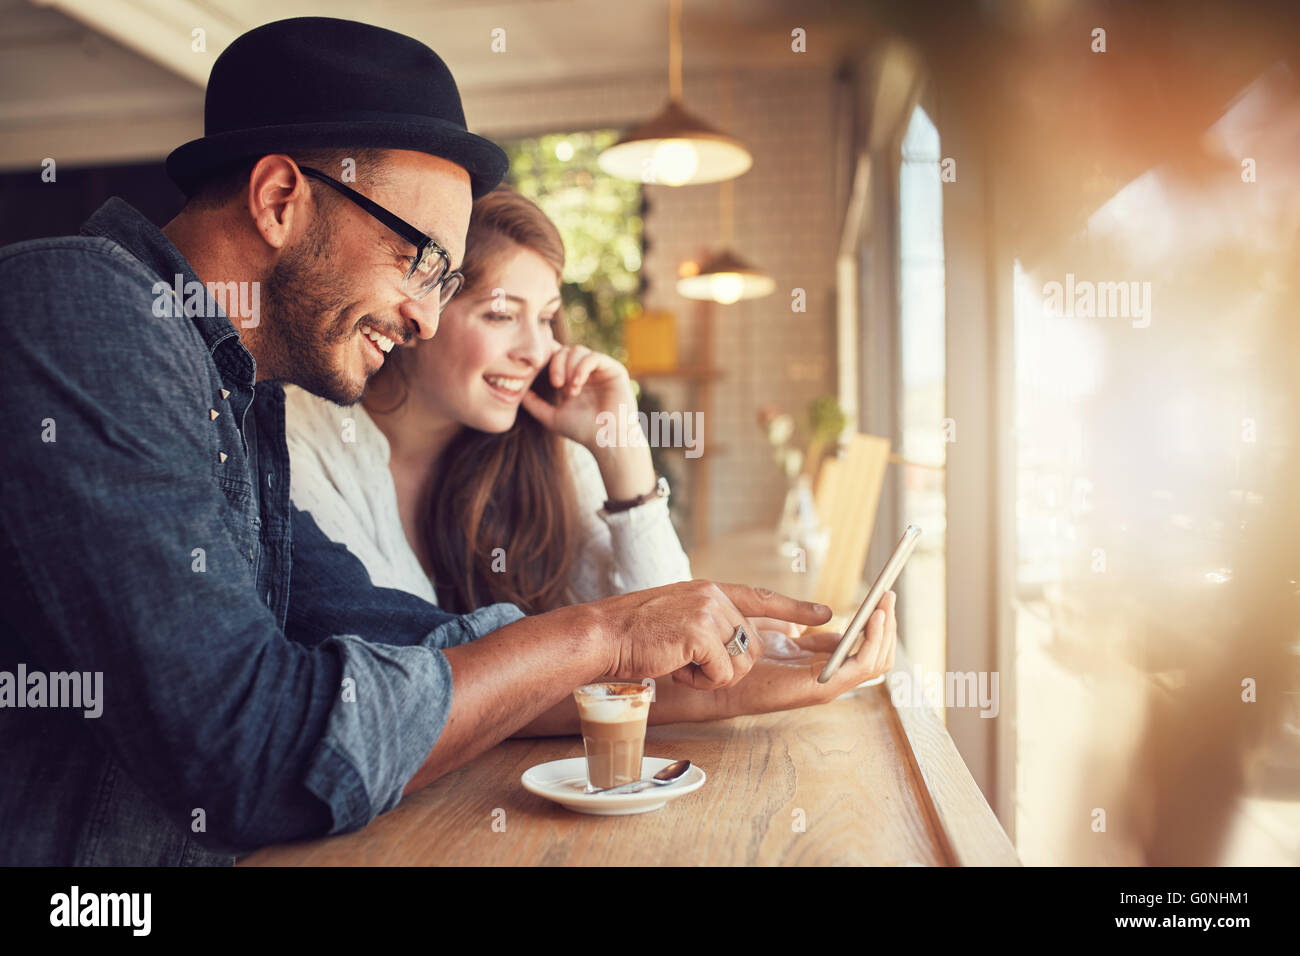 Smiling young couple in a coffee shop using touch screen computer. Young man and woman in a restaurant looking at digital tablet Stock Photo